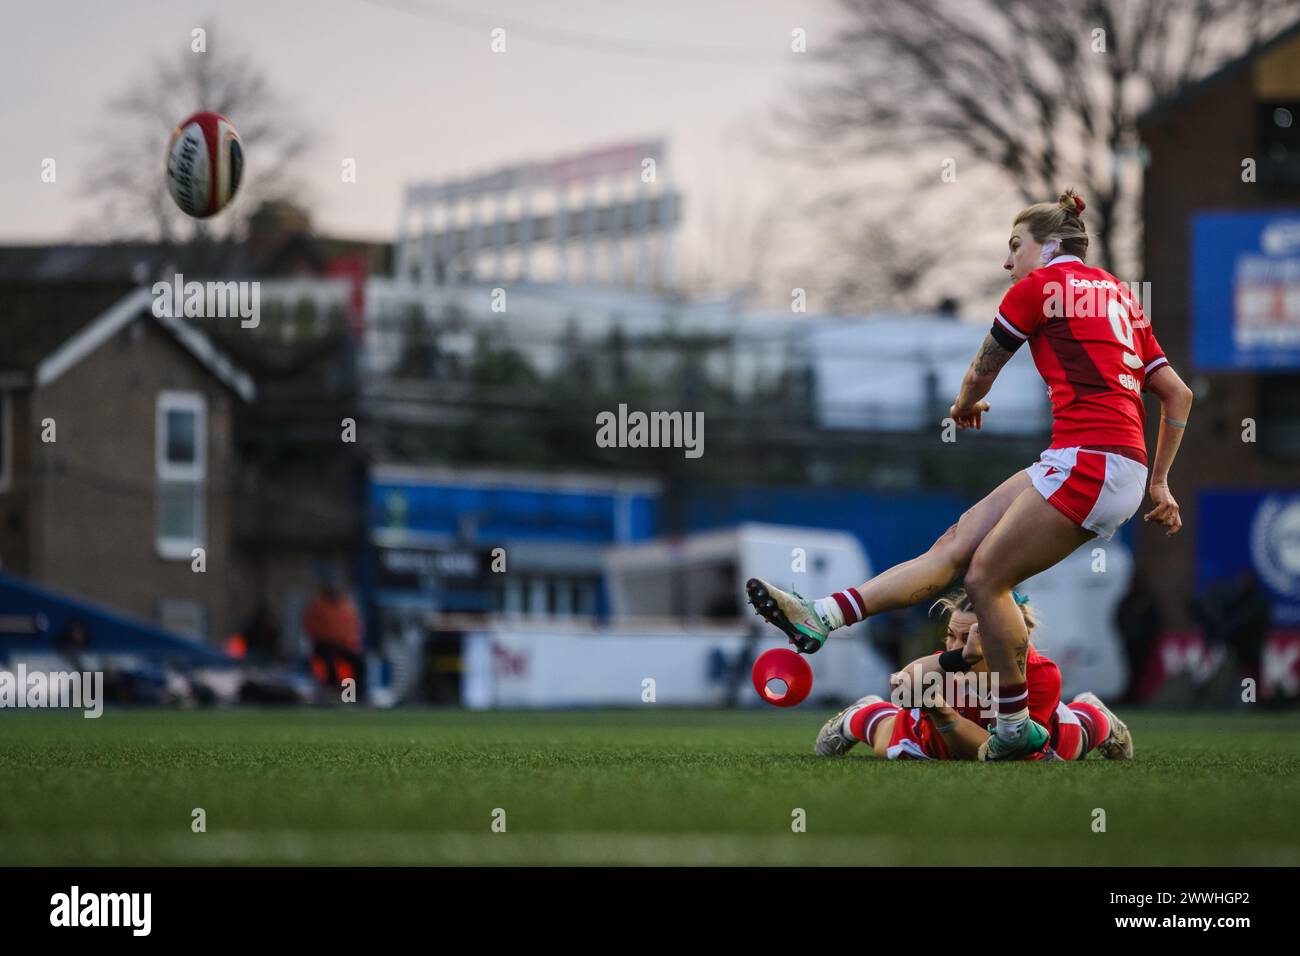 Cardiff, Wales. 23rd March 2024. Keira Bevan during the Women’s Six Nations rugby match, Wales versus Scotland at Cardiff Park Arms Stadium in Cardiff, Wales. Credit: Sam Hardwick/Alamy Live News. Stock Photo